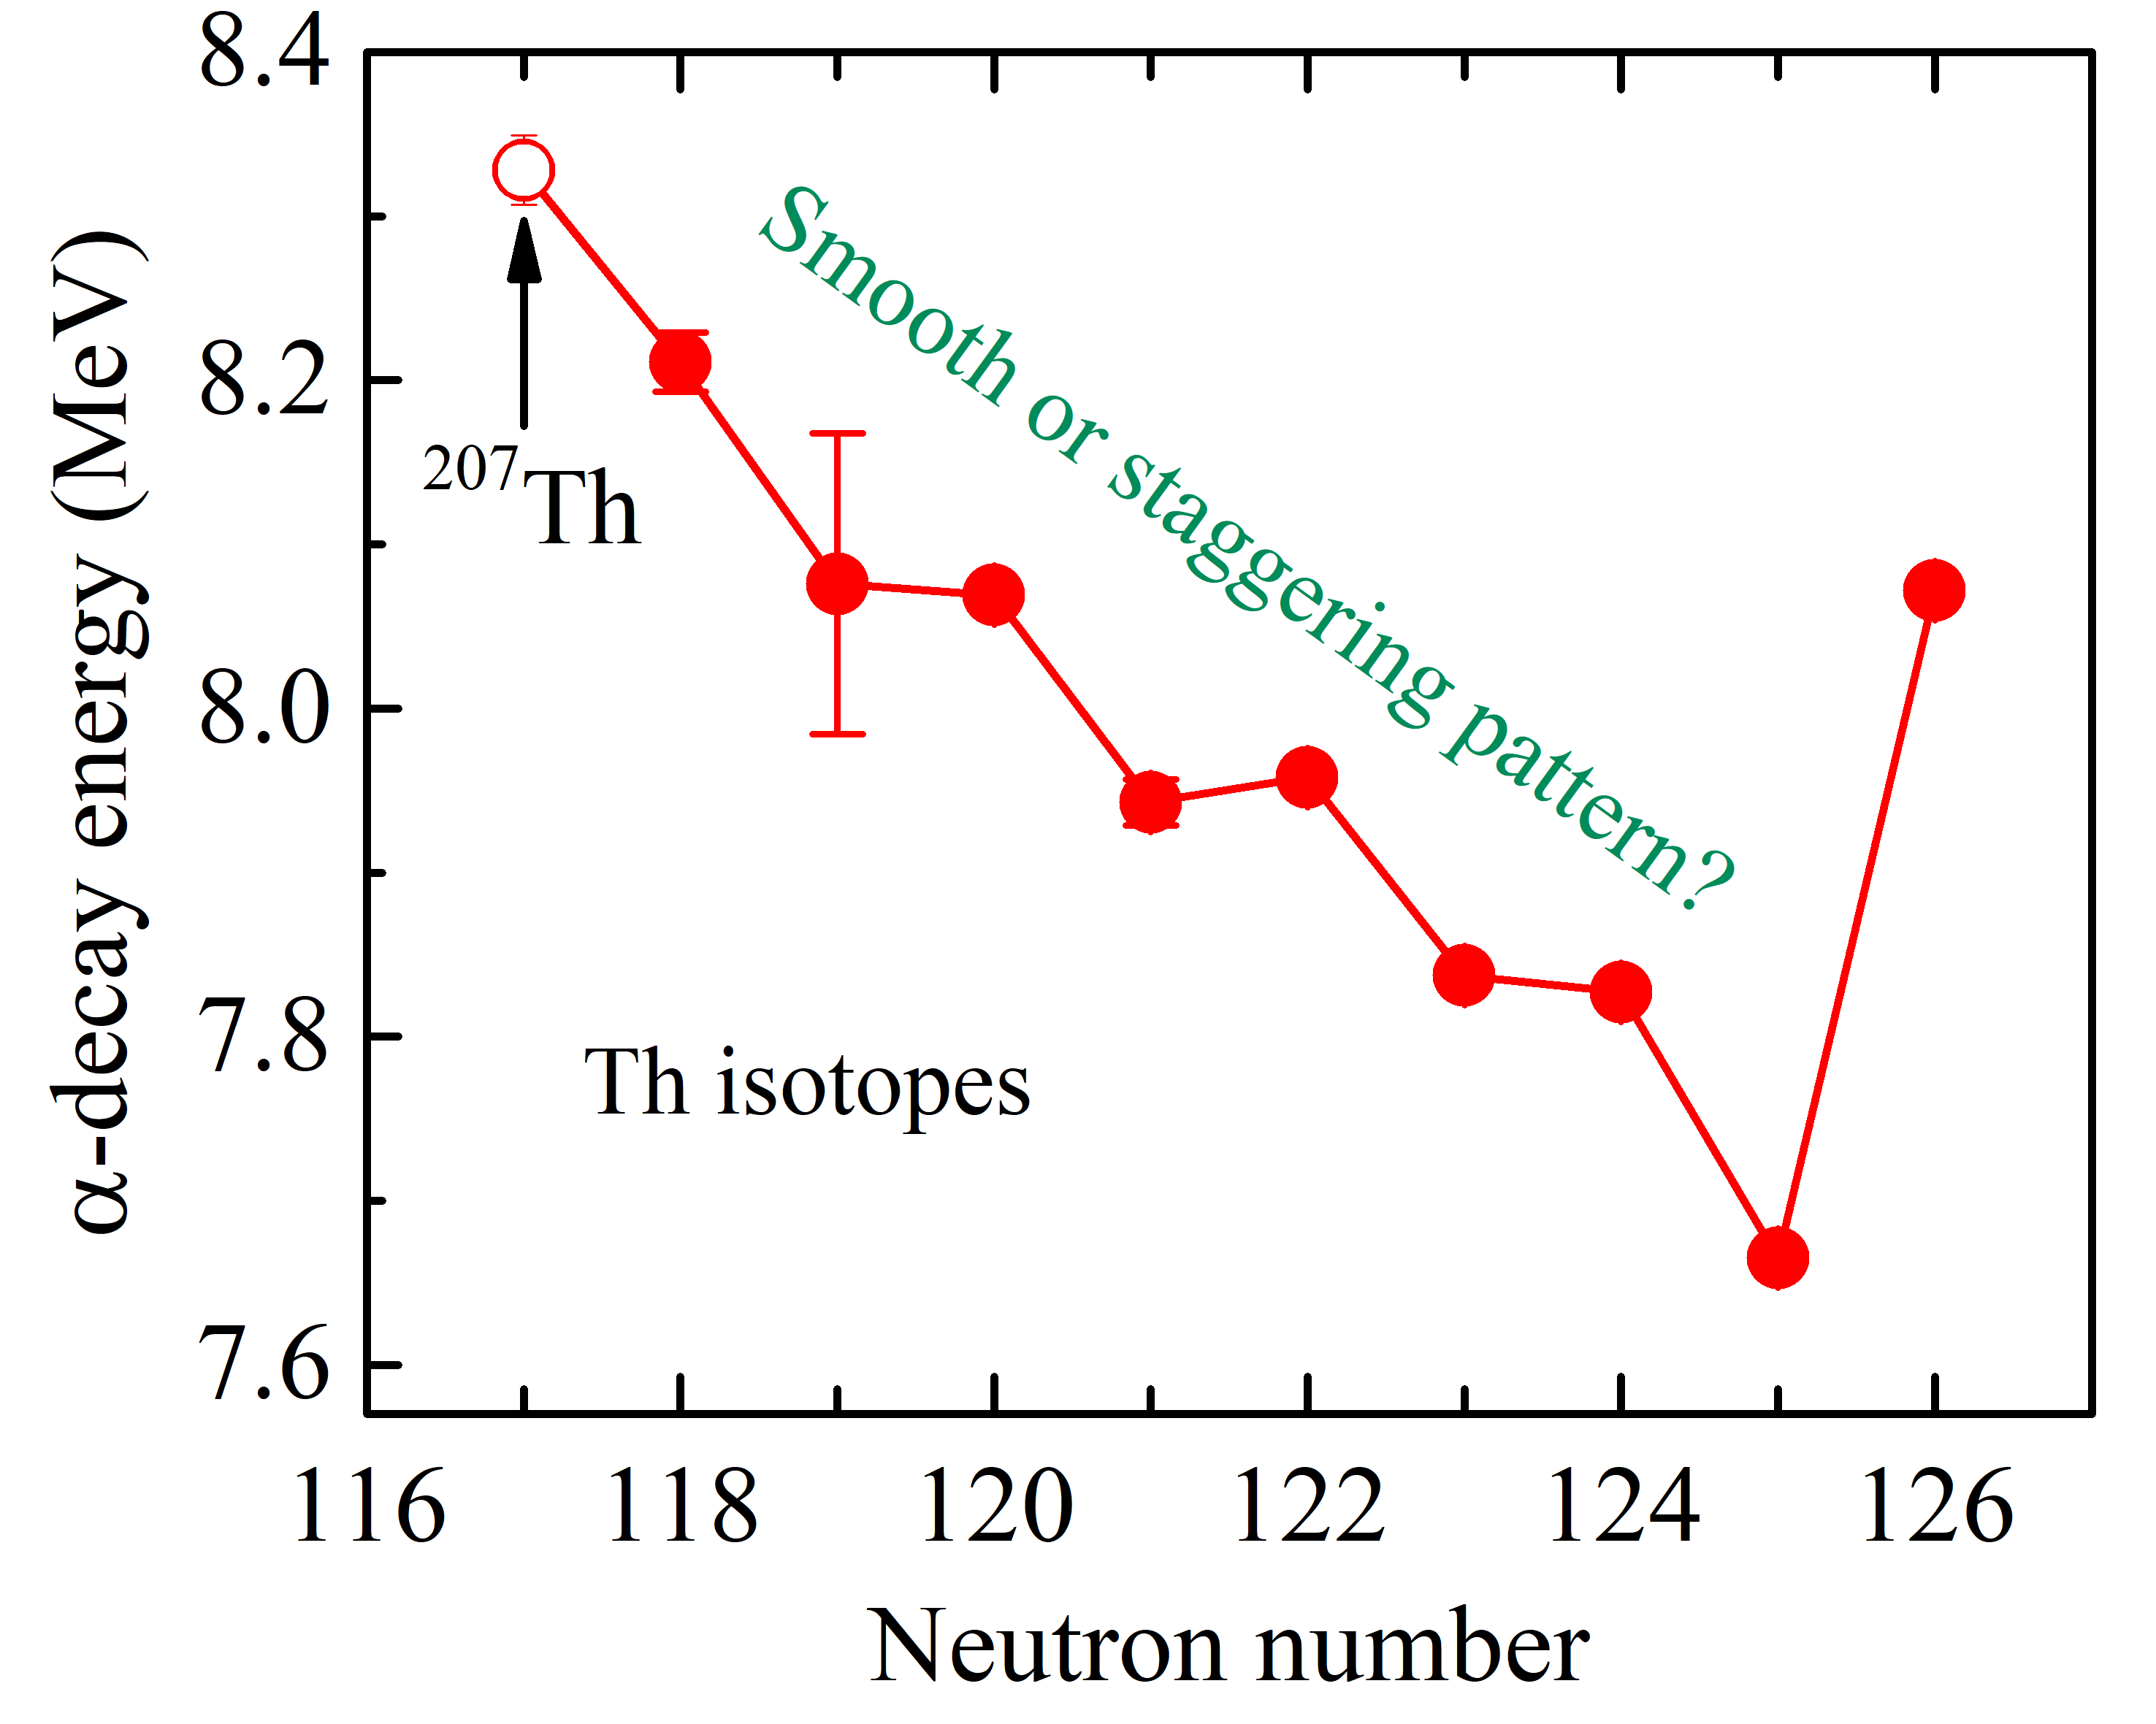 Researchers Discover New Isotope Thorium-207 and Odd-even Staggering in α-decay Energies